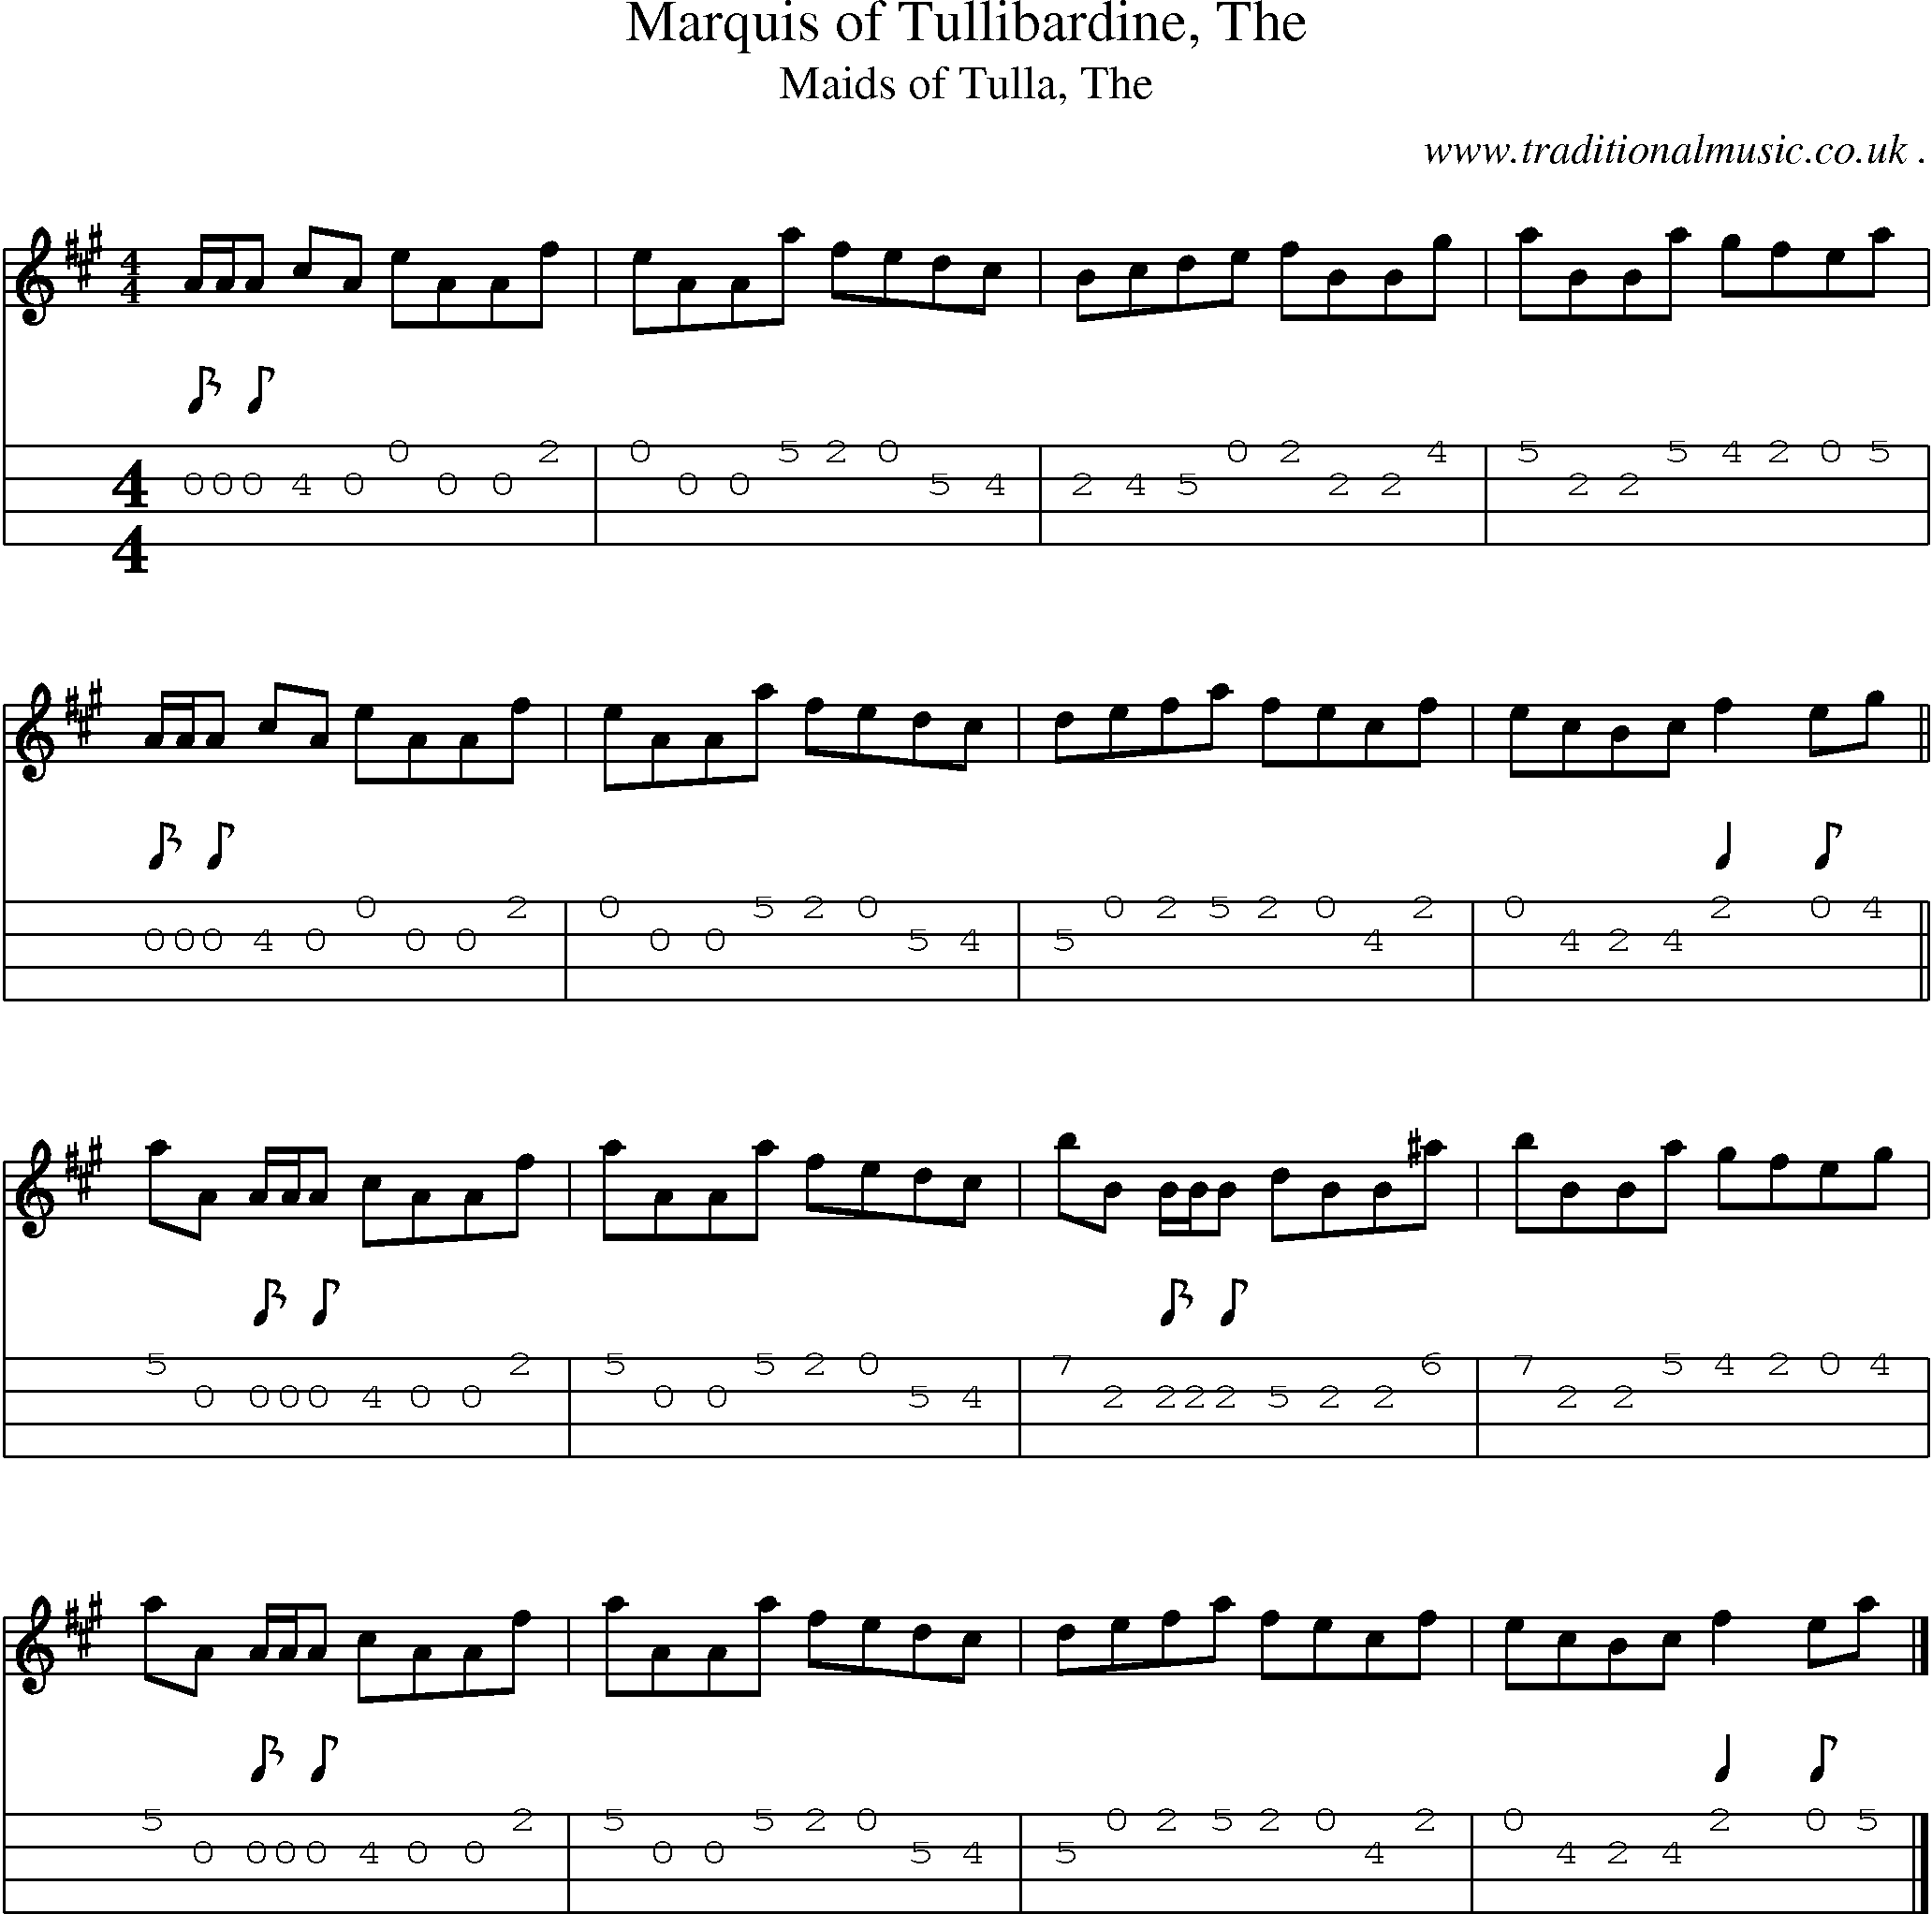 Sheet-music  score, Chords and Mandolin Tabs for Marquis Of Tullibardine The